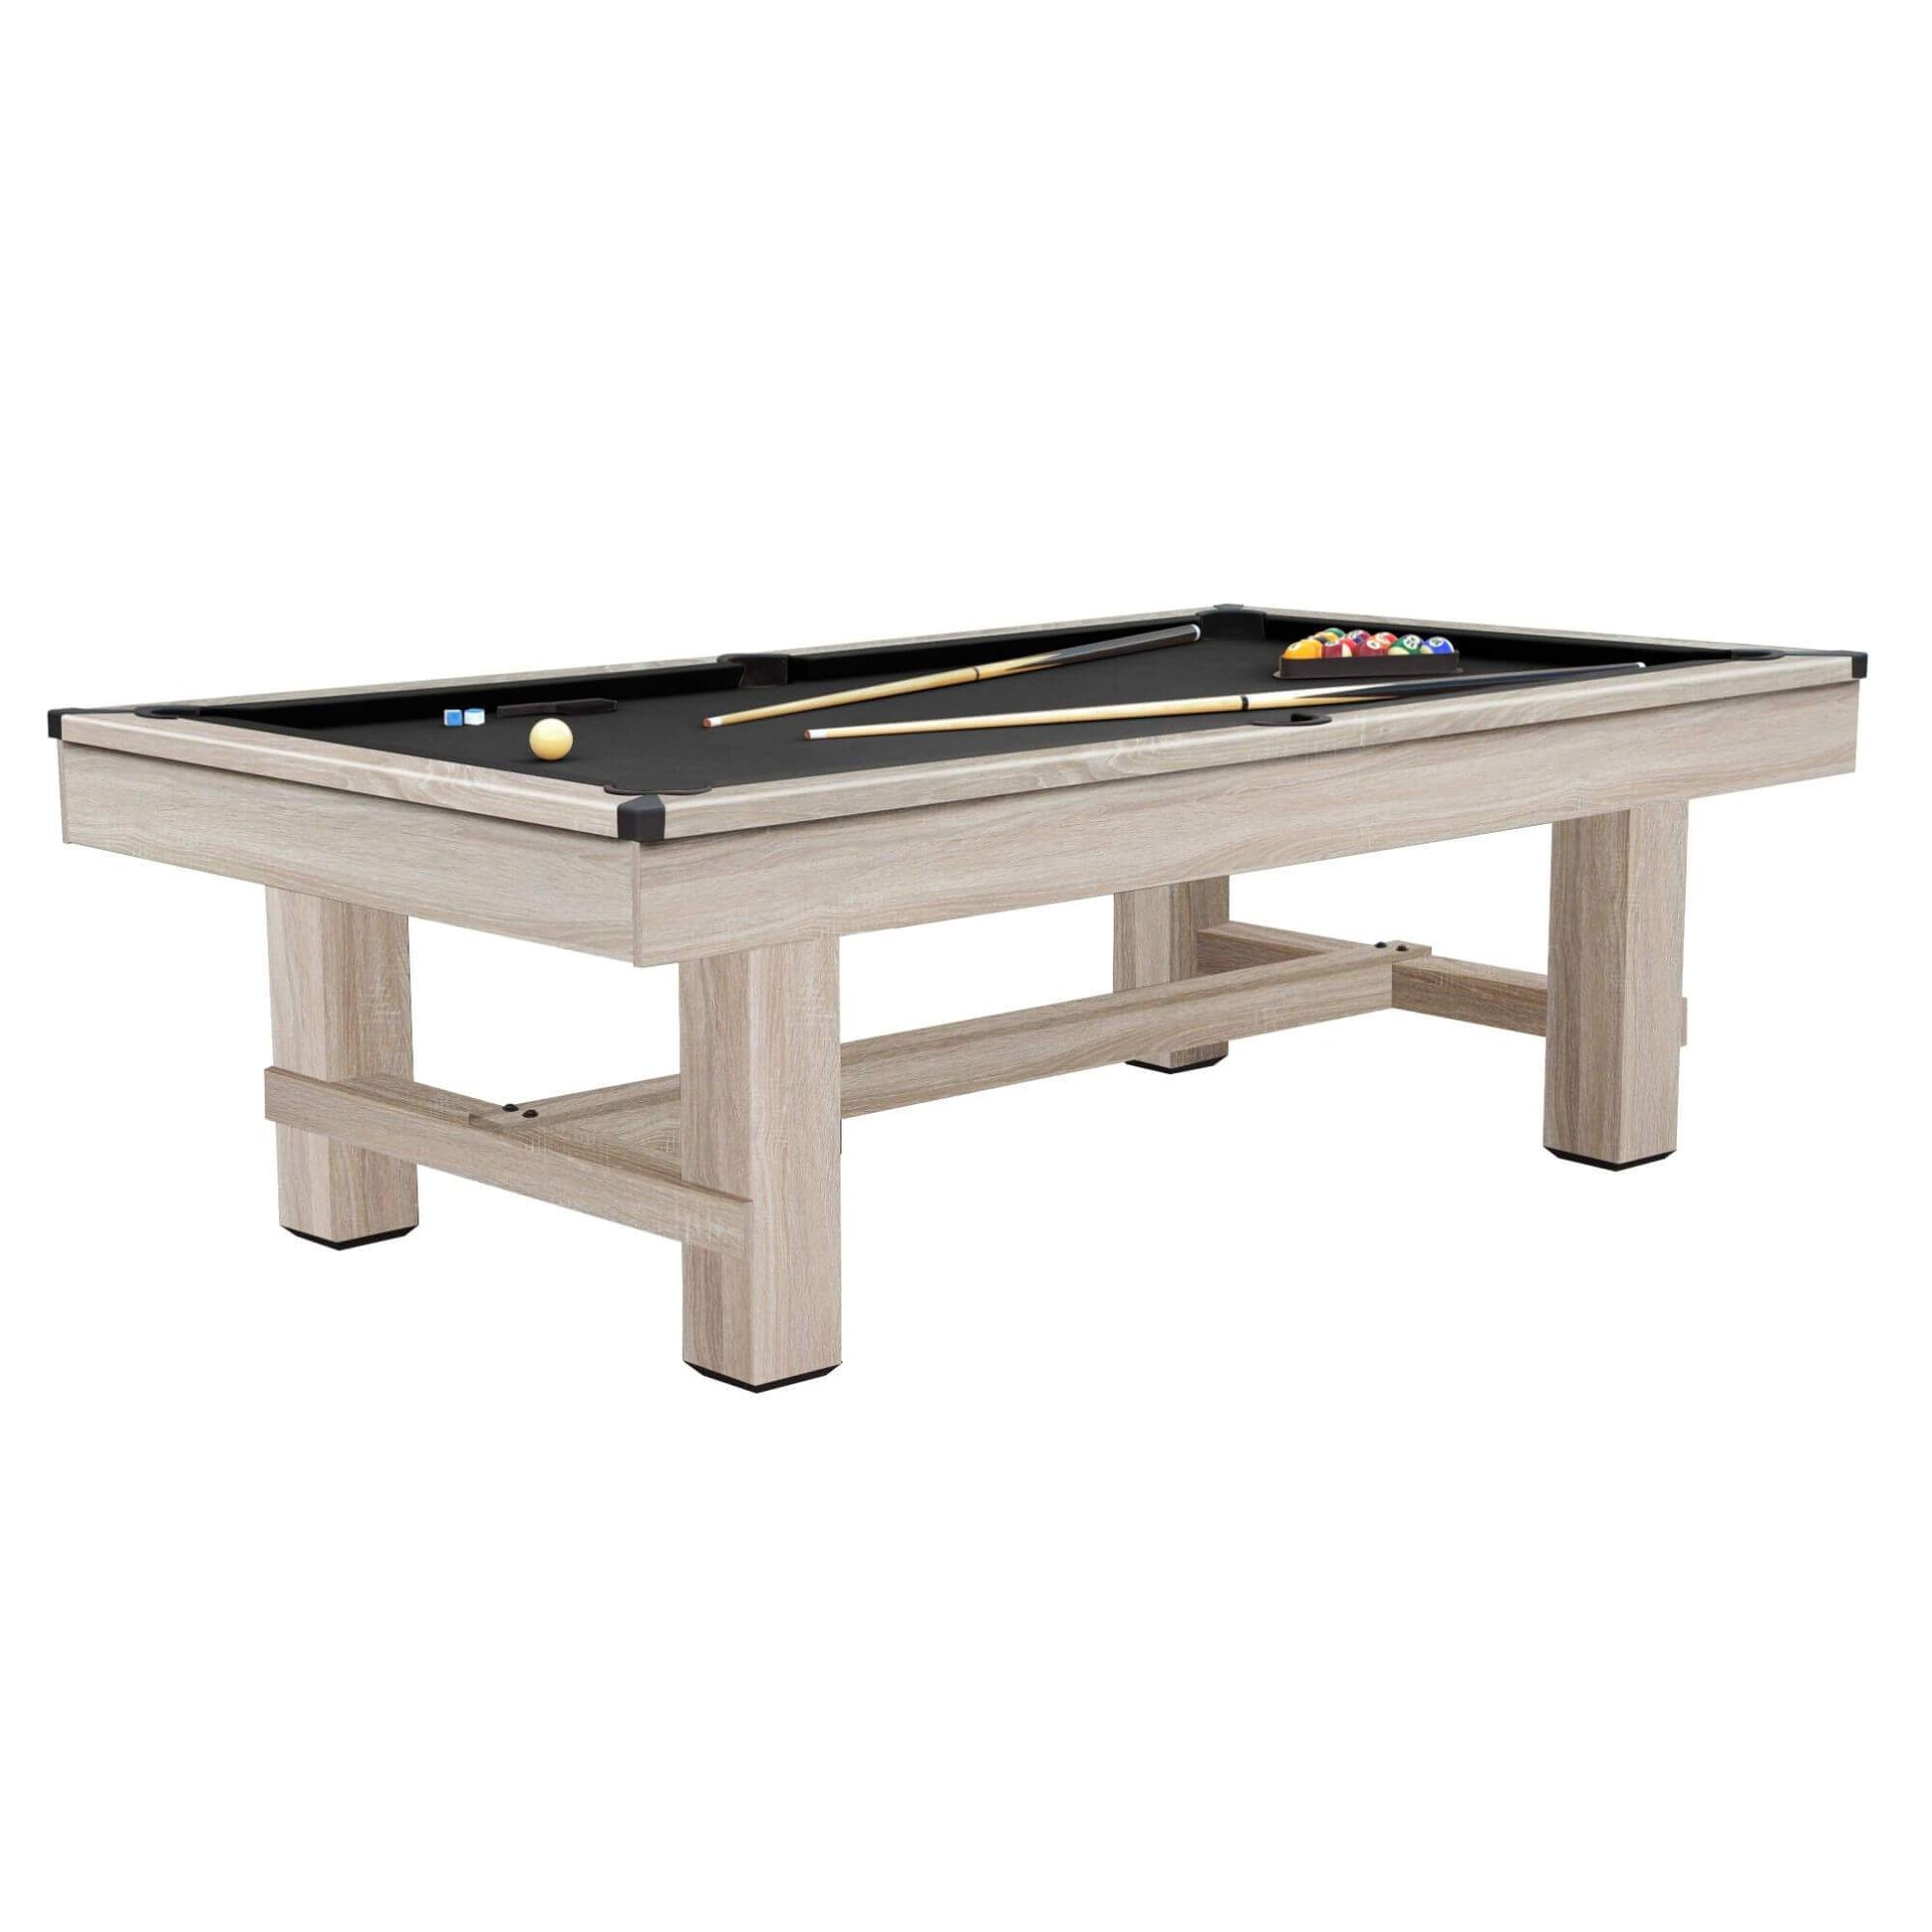 Playcraft Bryce Pool Table with Black Cloth - Upper Livin